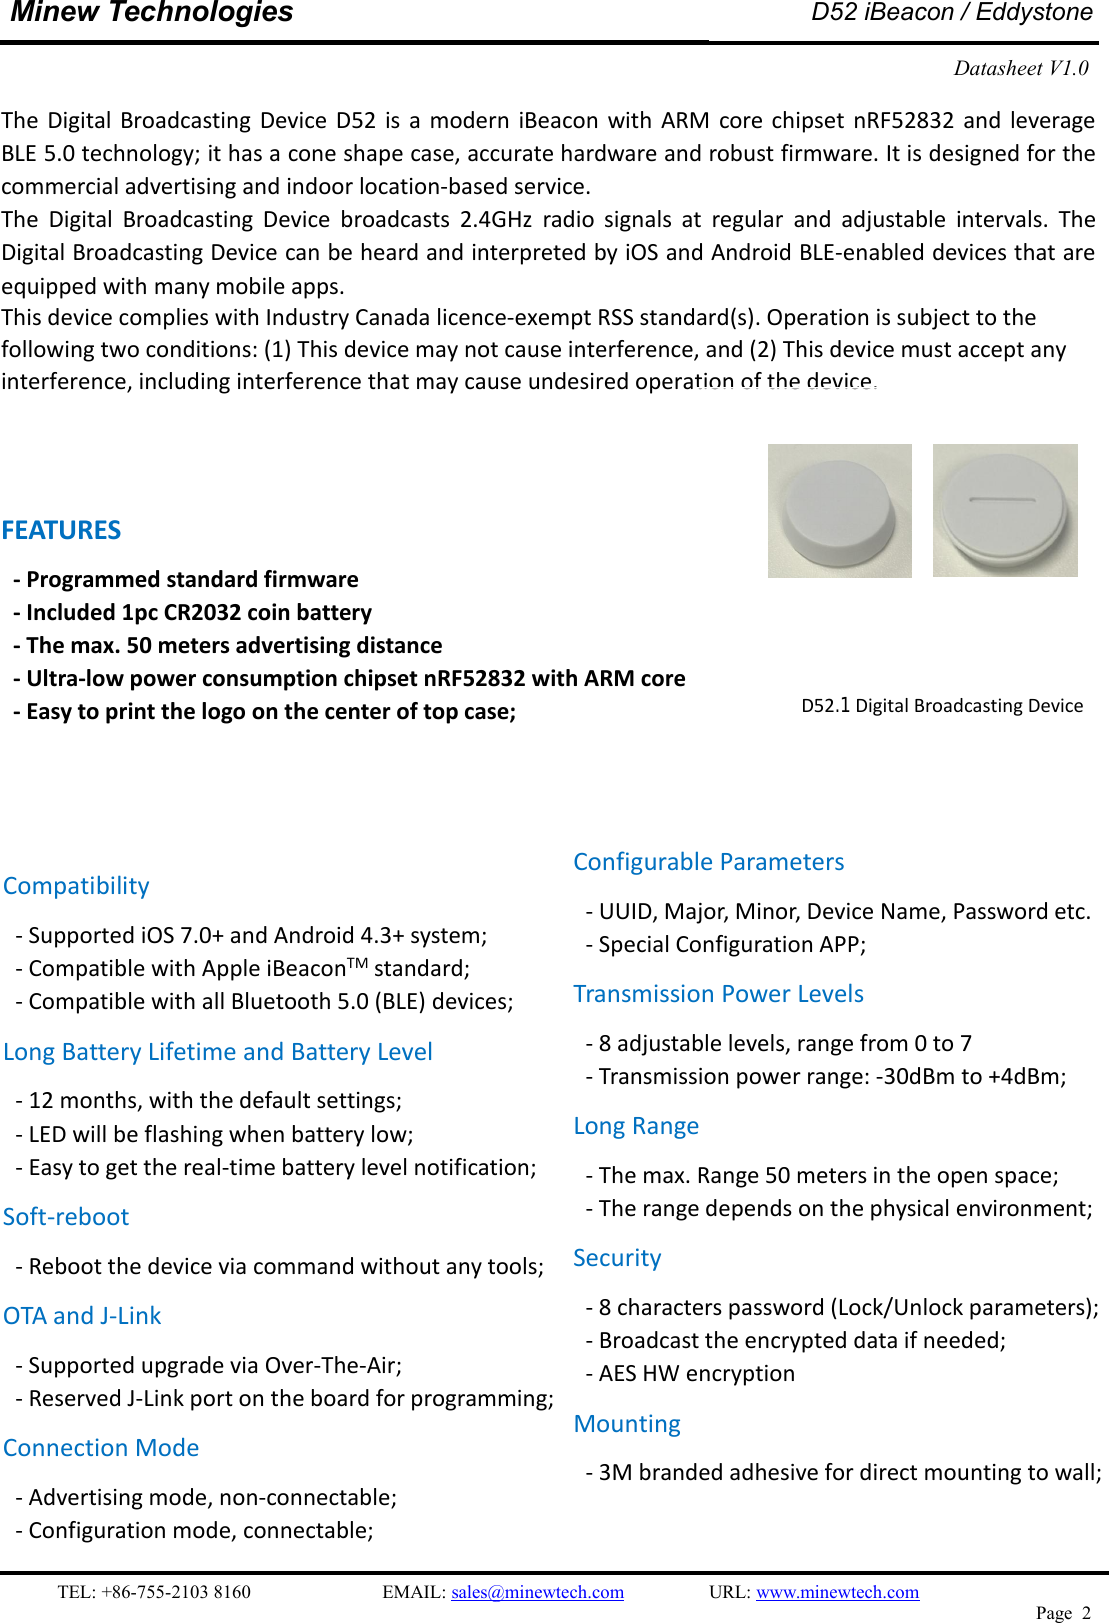 TEL: +86-755-2103 8160 EMAIL: sales@minewtech.com URL: www.minewtech.comPage 2Minew TechnologiesD52 iBeacon / EddystoneDatasheet V1.0The Digital Broadcasting Device D52 is a modern iBeacon with ARM core chipset nRF52832 and leverageBLE 5.0 technology; it has a cone shape case, accurate hardware and robust firmware. It is designed for thecommercial advertising and indoor location-based service.The Digital Broadcasting Device broadcasts 2.4GHz radio signals at regular and adjustable intervals. TheDigital Broadcasting Device can be heard and interpreted by iOS and Android BLE-enabled devices that areequipped with many mobile apps.This device complies with Industry Canada licence-exempt RSS standard(s). Operation is subject to the following two conditions: (1) This device may not cause interference, and (2) This device must accept any interference, including interference that may cause undesired operation of the device.  FEATURES- Programmed standard firmware- Included 1pc CR2032 coin battery- The max. 50 meters advertising distance- Ultra-low power consumption chipset nRF52832 with ARM core- Easy to print the logo on the center of top case;SPECIFICATIOND52.1 Digital Broadcasting DeviceCompatibility- Supported iOS 7.0+ and Android 4.3+ system;- Compatible with Apple iBeaconTM standard;- Compatible with all Bluetooth 5.0 (BLE) devices;Long Battery Lifetime and Battery Level- 12 months, with the default settings;- LED will be flashing when battery low;- Easy to get the real-time battery level notification;Soft-reboot- Reboot the device via command without any tools;OTA and J-Link- Supported upgrade via Over-The-Air;- Reserved J-Link port on the board for programming;Connection Mode- Advertising mode, non-connectable;- Configuration mode, connectable;Configurable Parameters- UUID, Major, Minor, Device Name, Password etc.- Special Configuration APP;Transmission Power Levels- 8 adjustable levels, range from 0 to 7- Transmission power range: -30dBm to +4dBm;Long Range- The max. Range 50 meters in the open space;- The range depends on the physical environment;Security- 8 characters password (Lock/Unlock parameters);- Broadcast the encrypted data if needed;- AES HW encryptionMounting- 3M branded adhesive for direct mounting to wall;